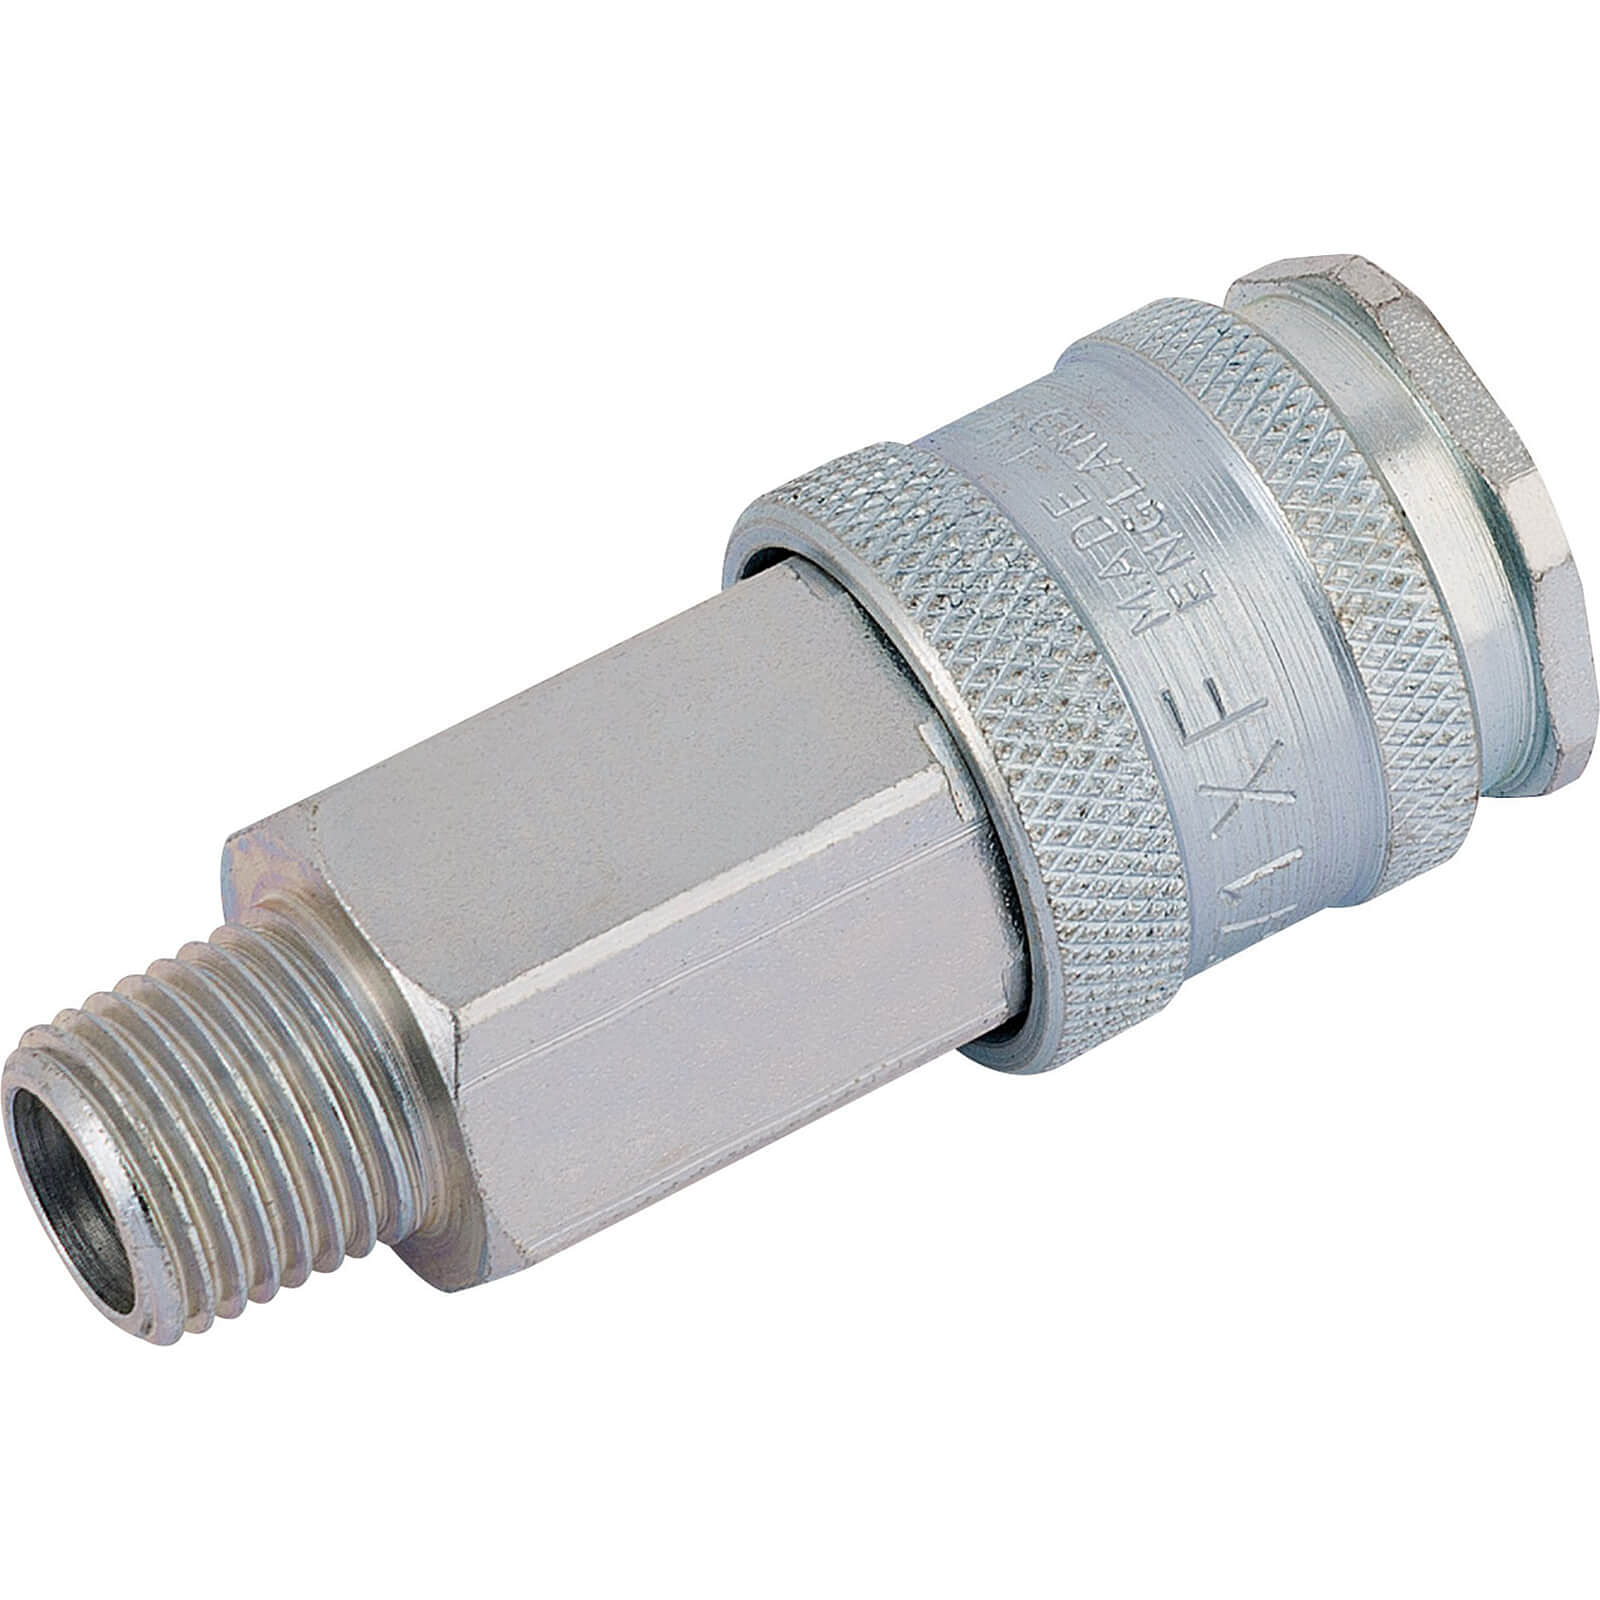 Sold Loose |25811 Genuine DRAPER 1/2" Bore PCL Double Ended Air Hose Connector 